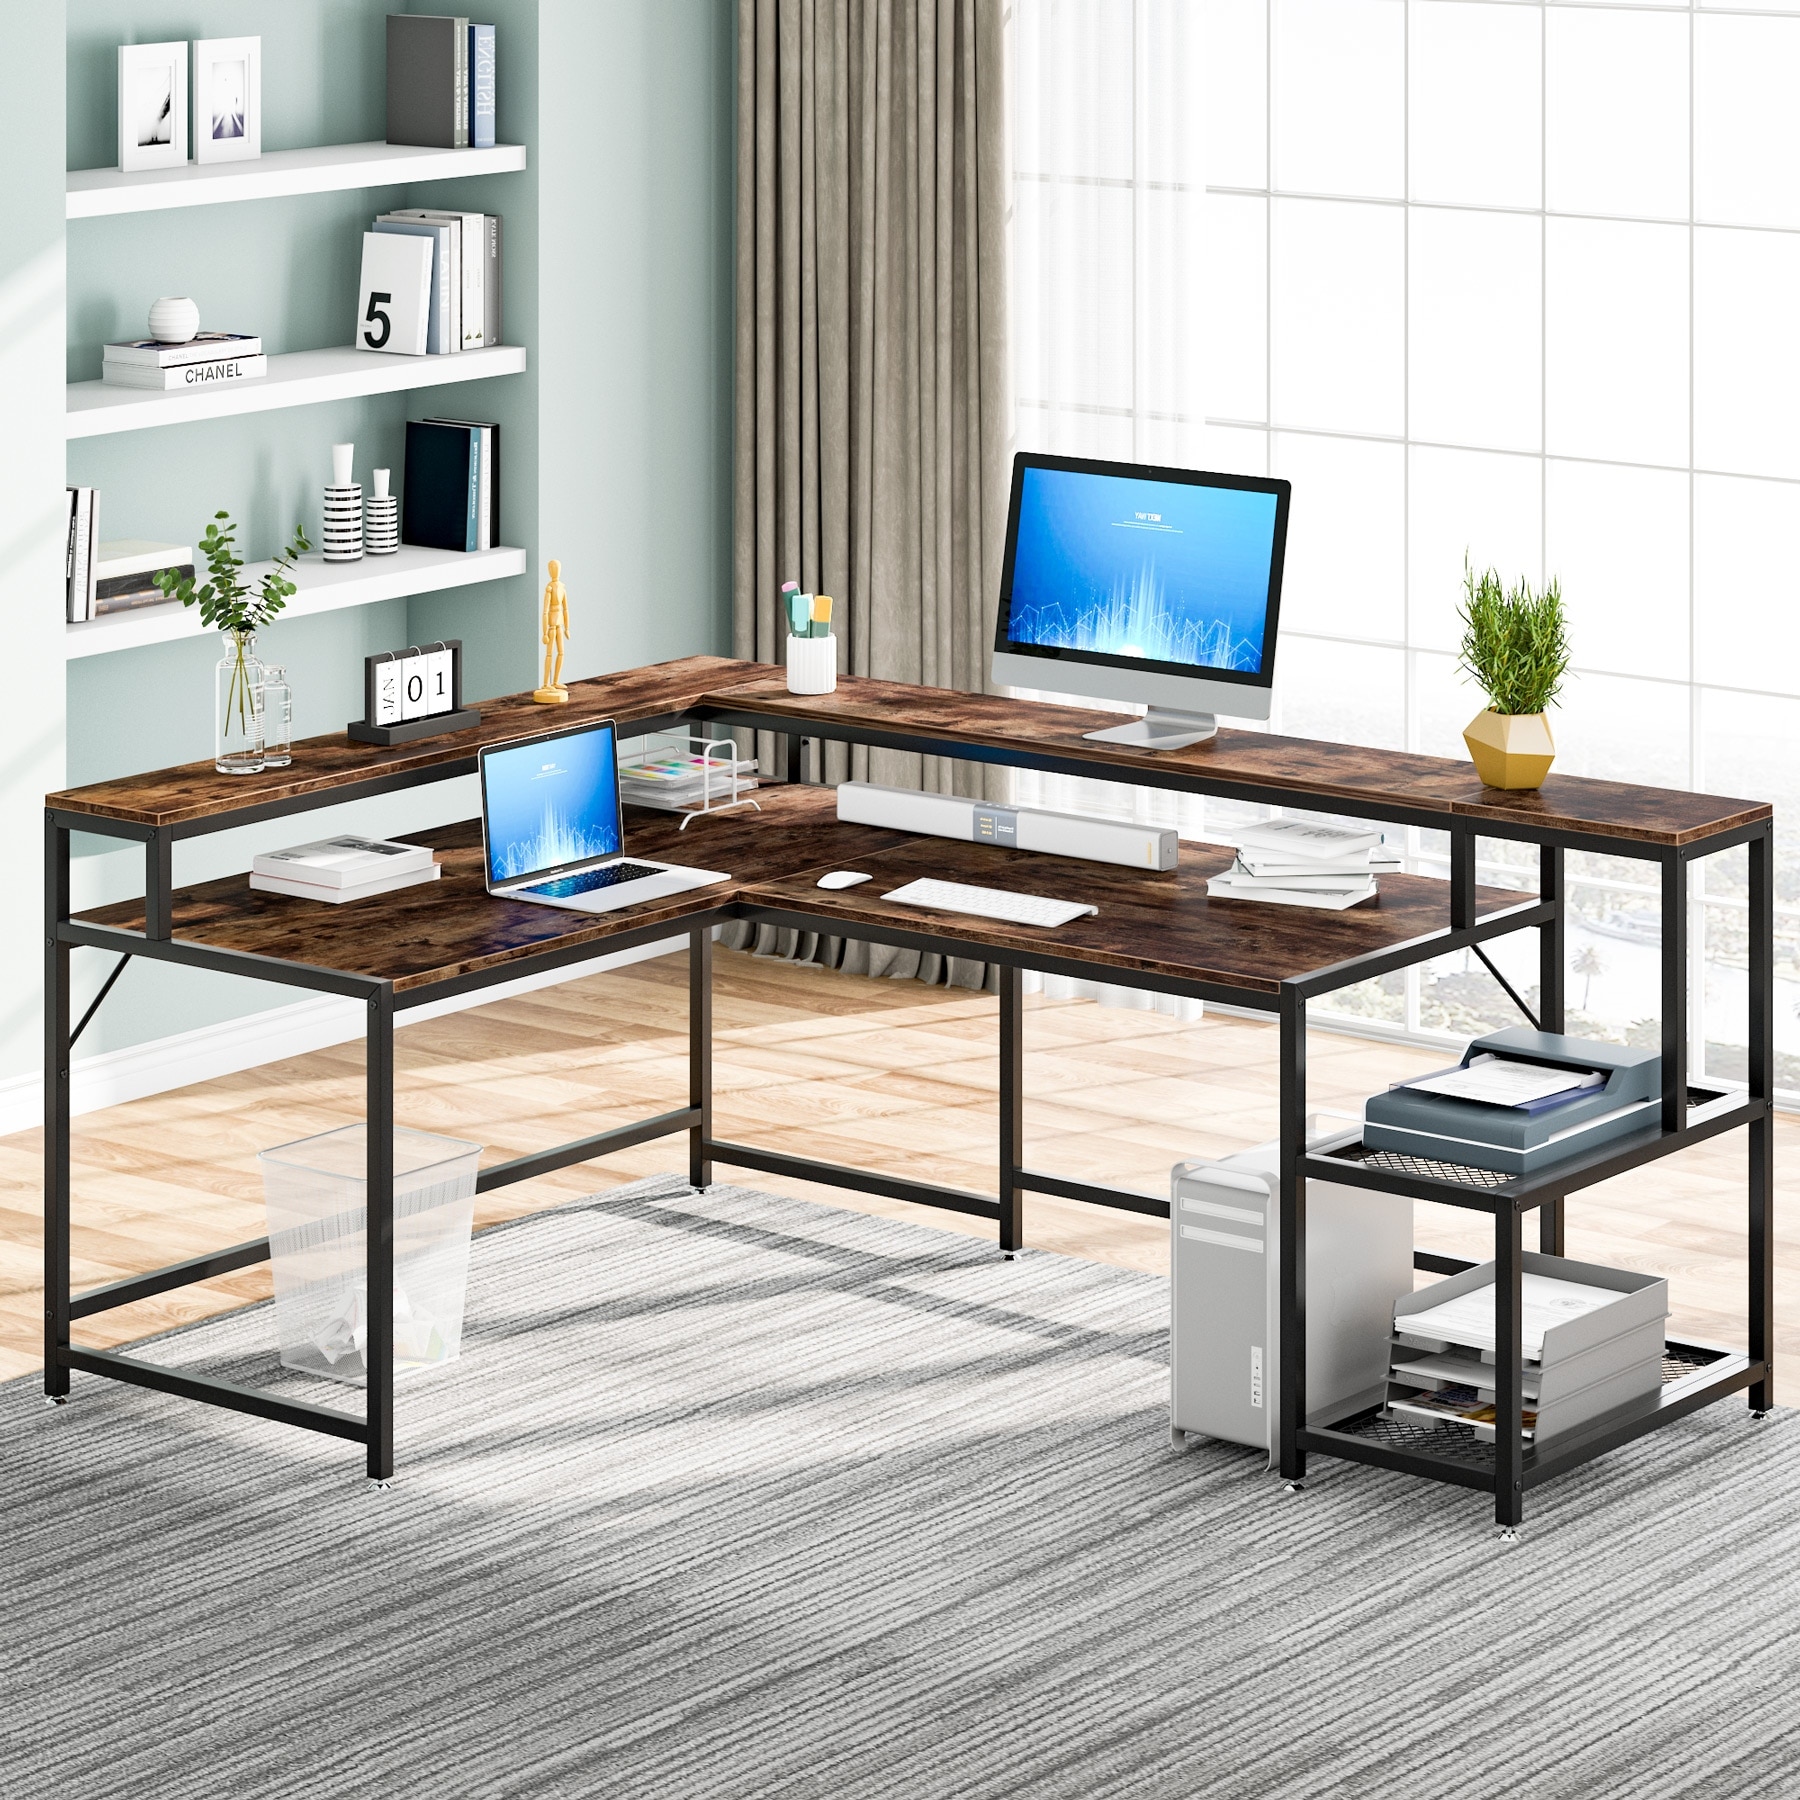 https://ak1.ostkcdn.com/images/products/is/images/direct/6a2f2860ce813a4ef1e02c28ccd7ef7ae0abc279/Large-69-Inch-L-Shaped-Computer-Writing-Desk-with-Monitor-Stand%2C-Reversible-Corner-Desk-with-Storage-Shelves.jpg